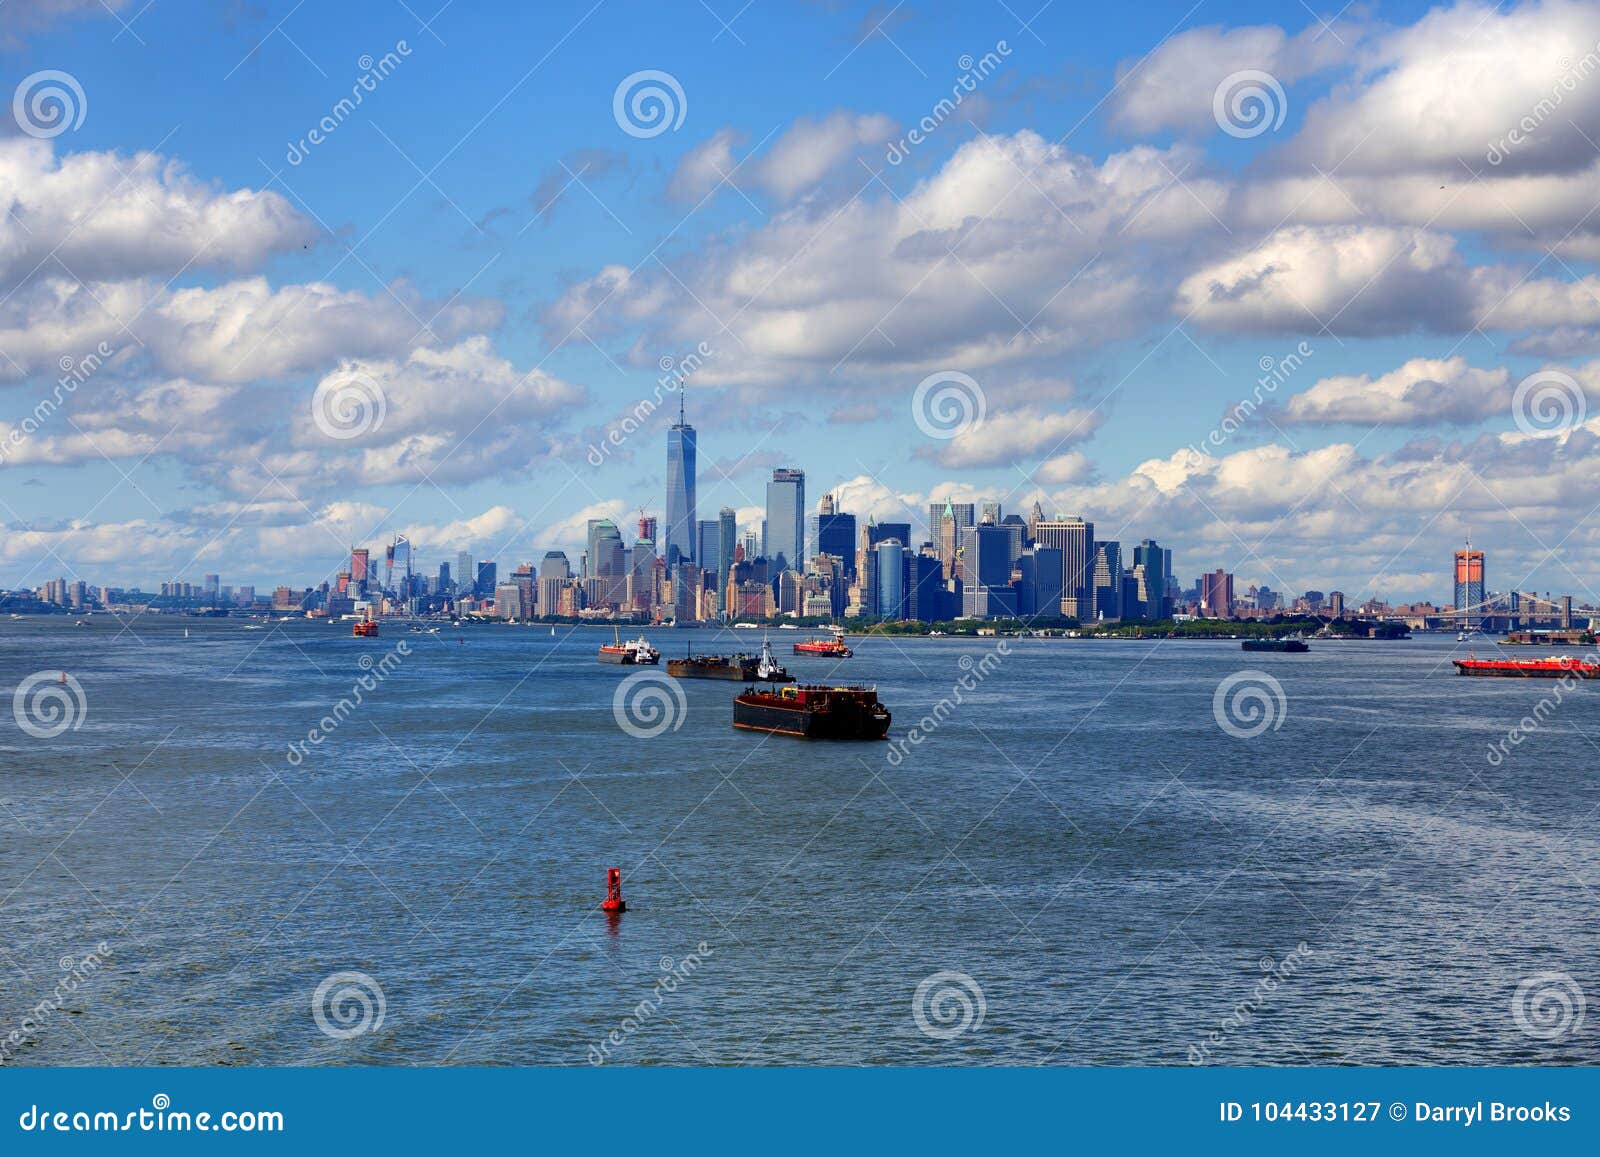 large freighters and new york city